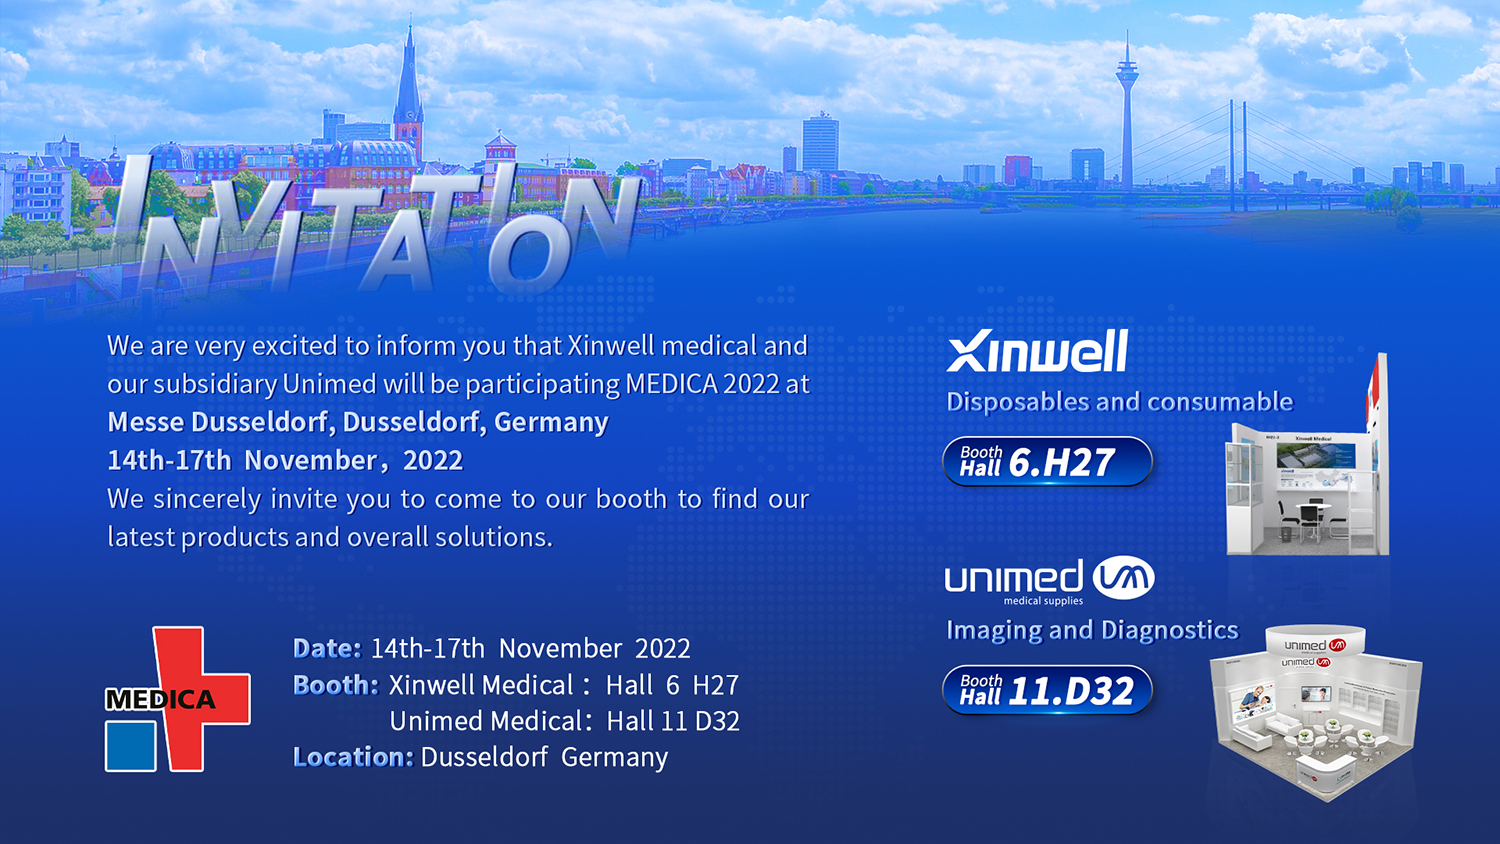 Xinwell and Unimed attend Medica 2022